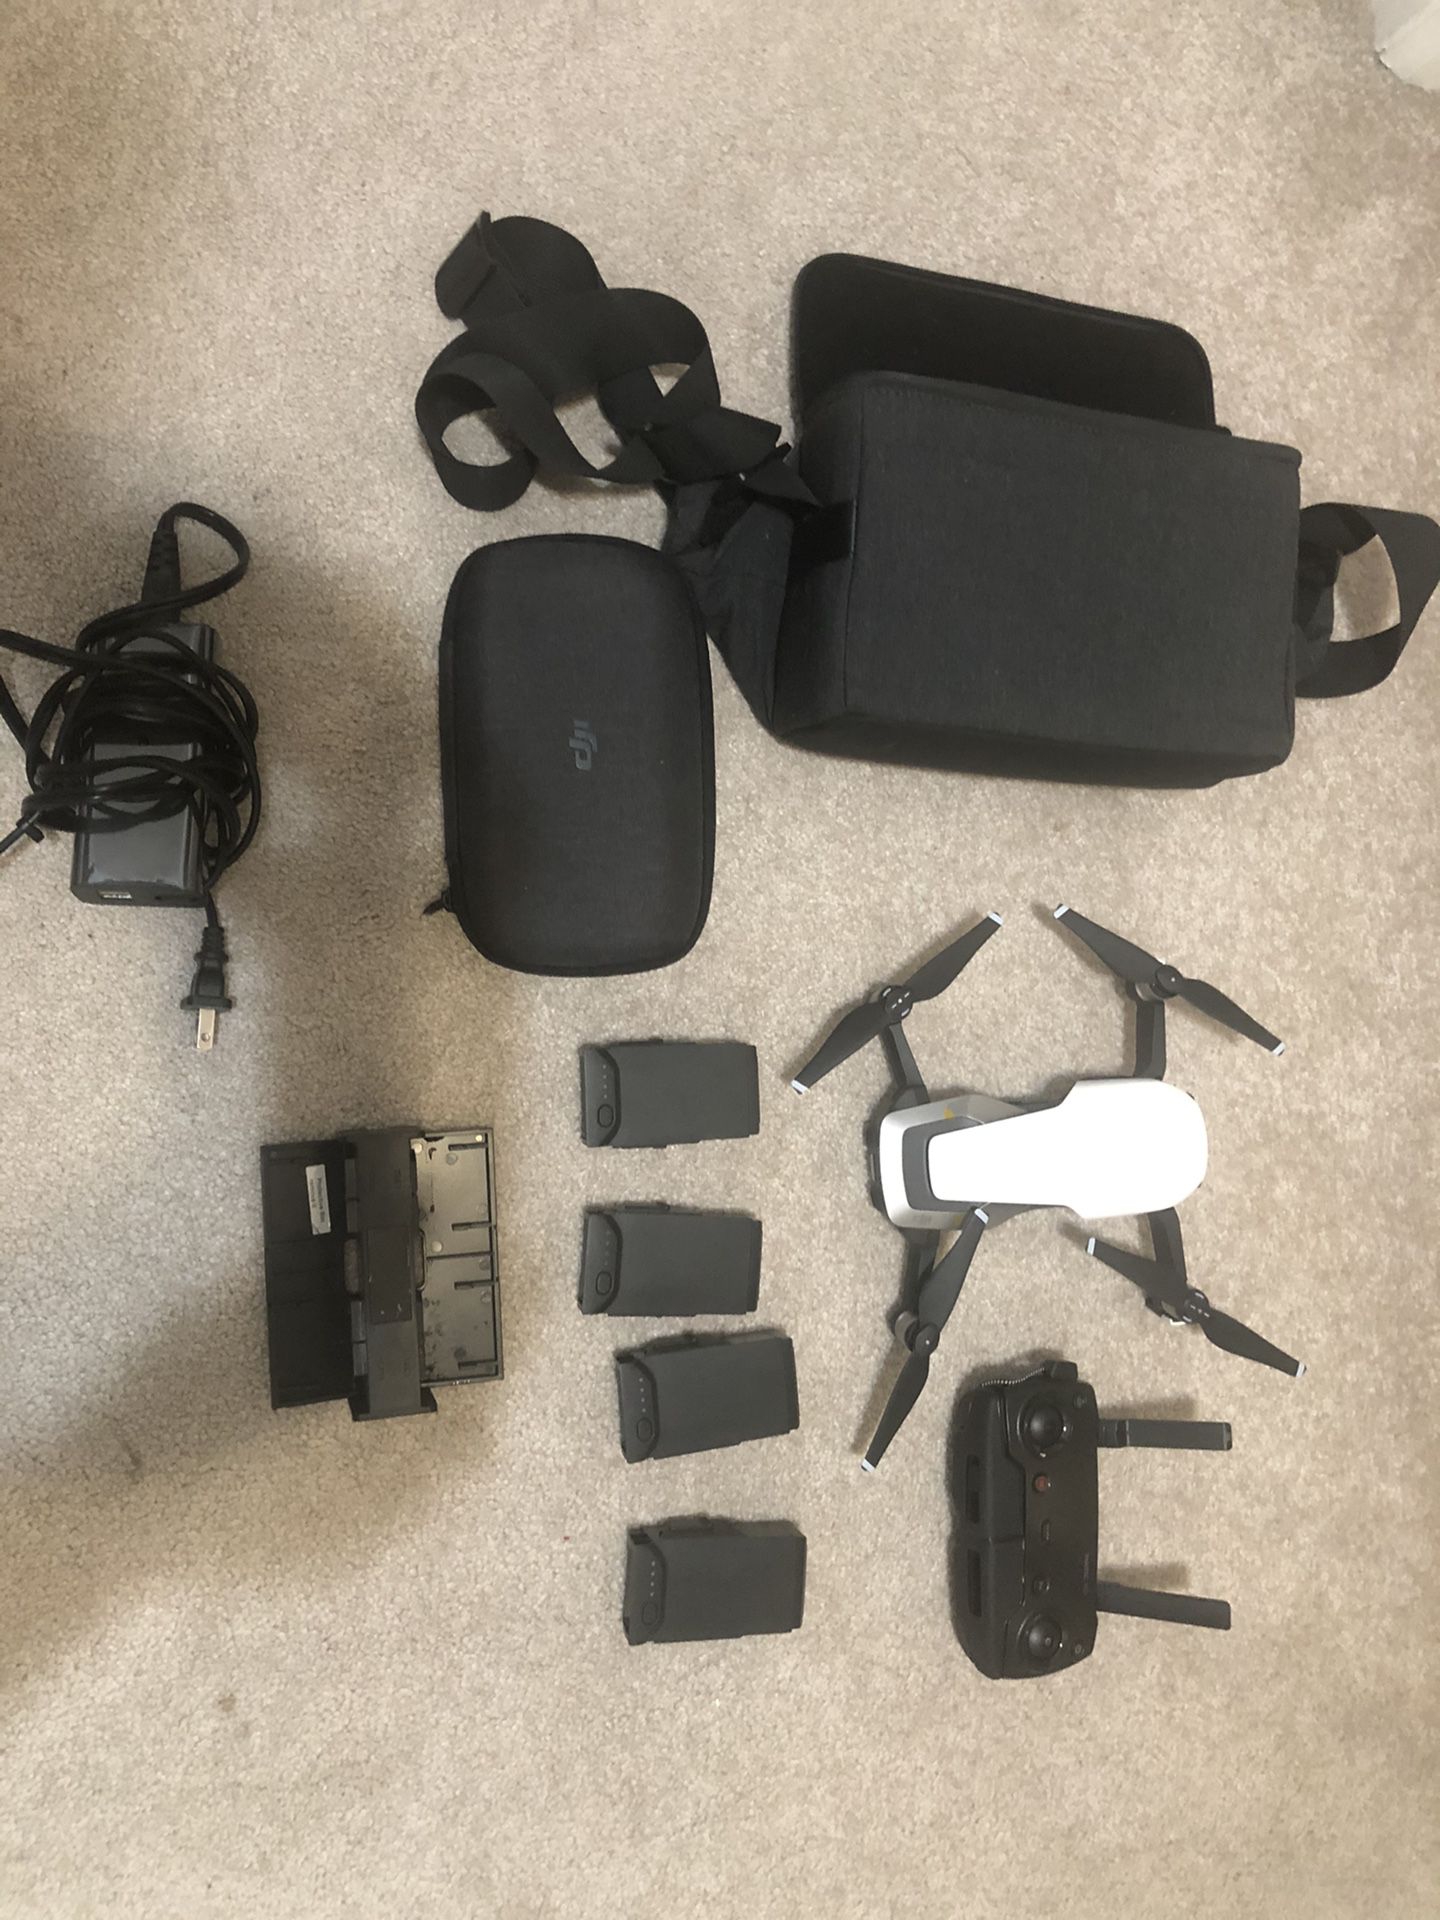 DJI Mavic Air excellent barely use